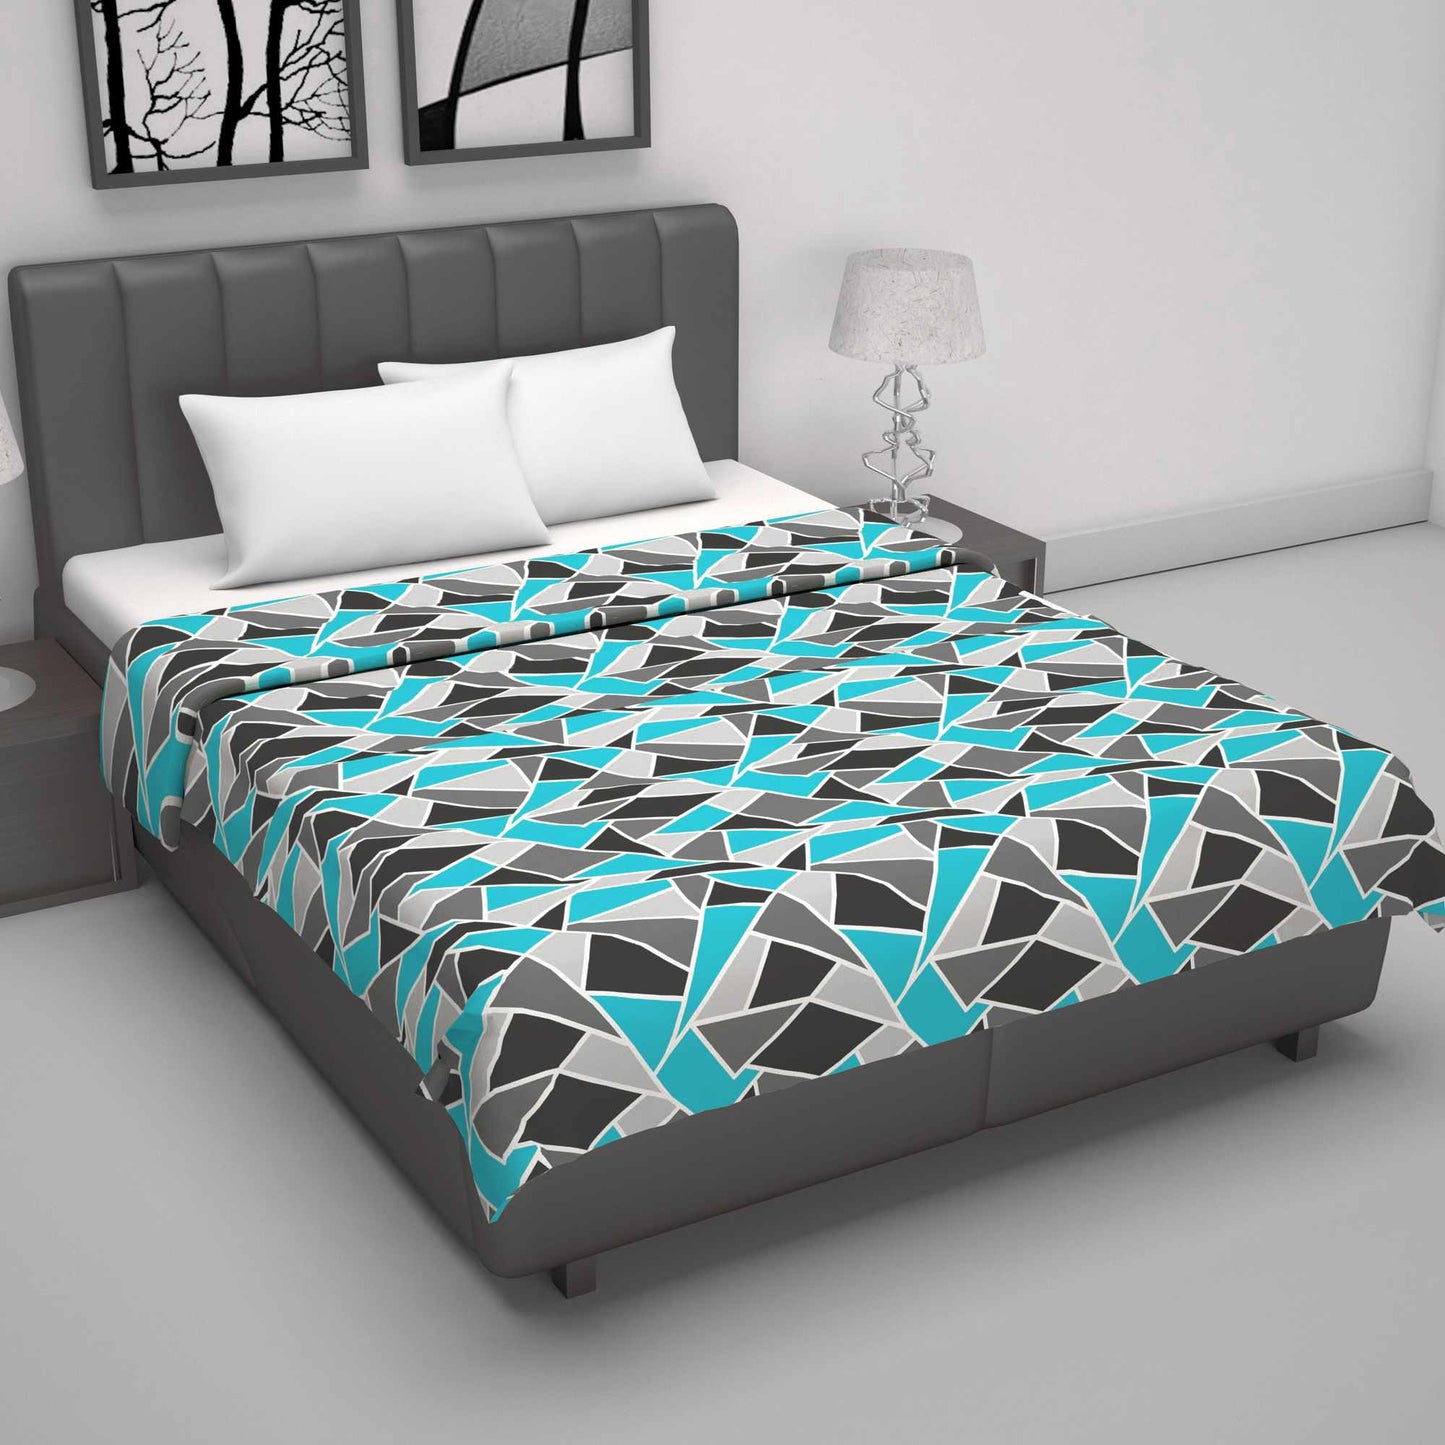 Blue Grey 100% Cotton 120 GSM Reversible Geometric Printed Double Bed AC Dohar Blanket For Mild Winter